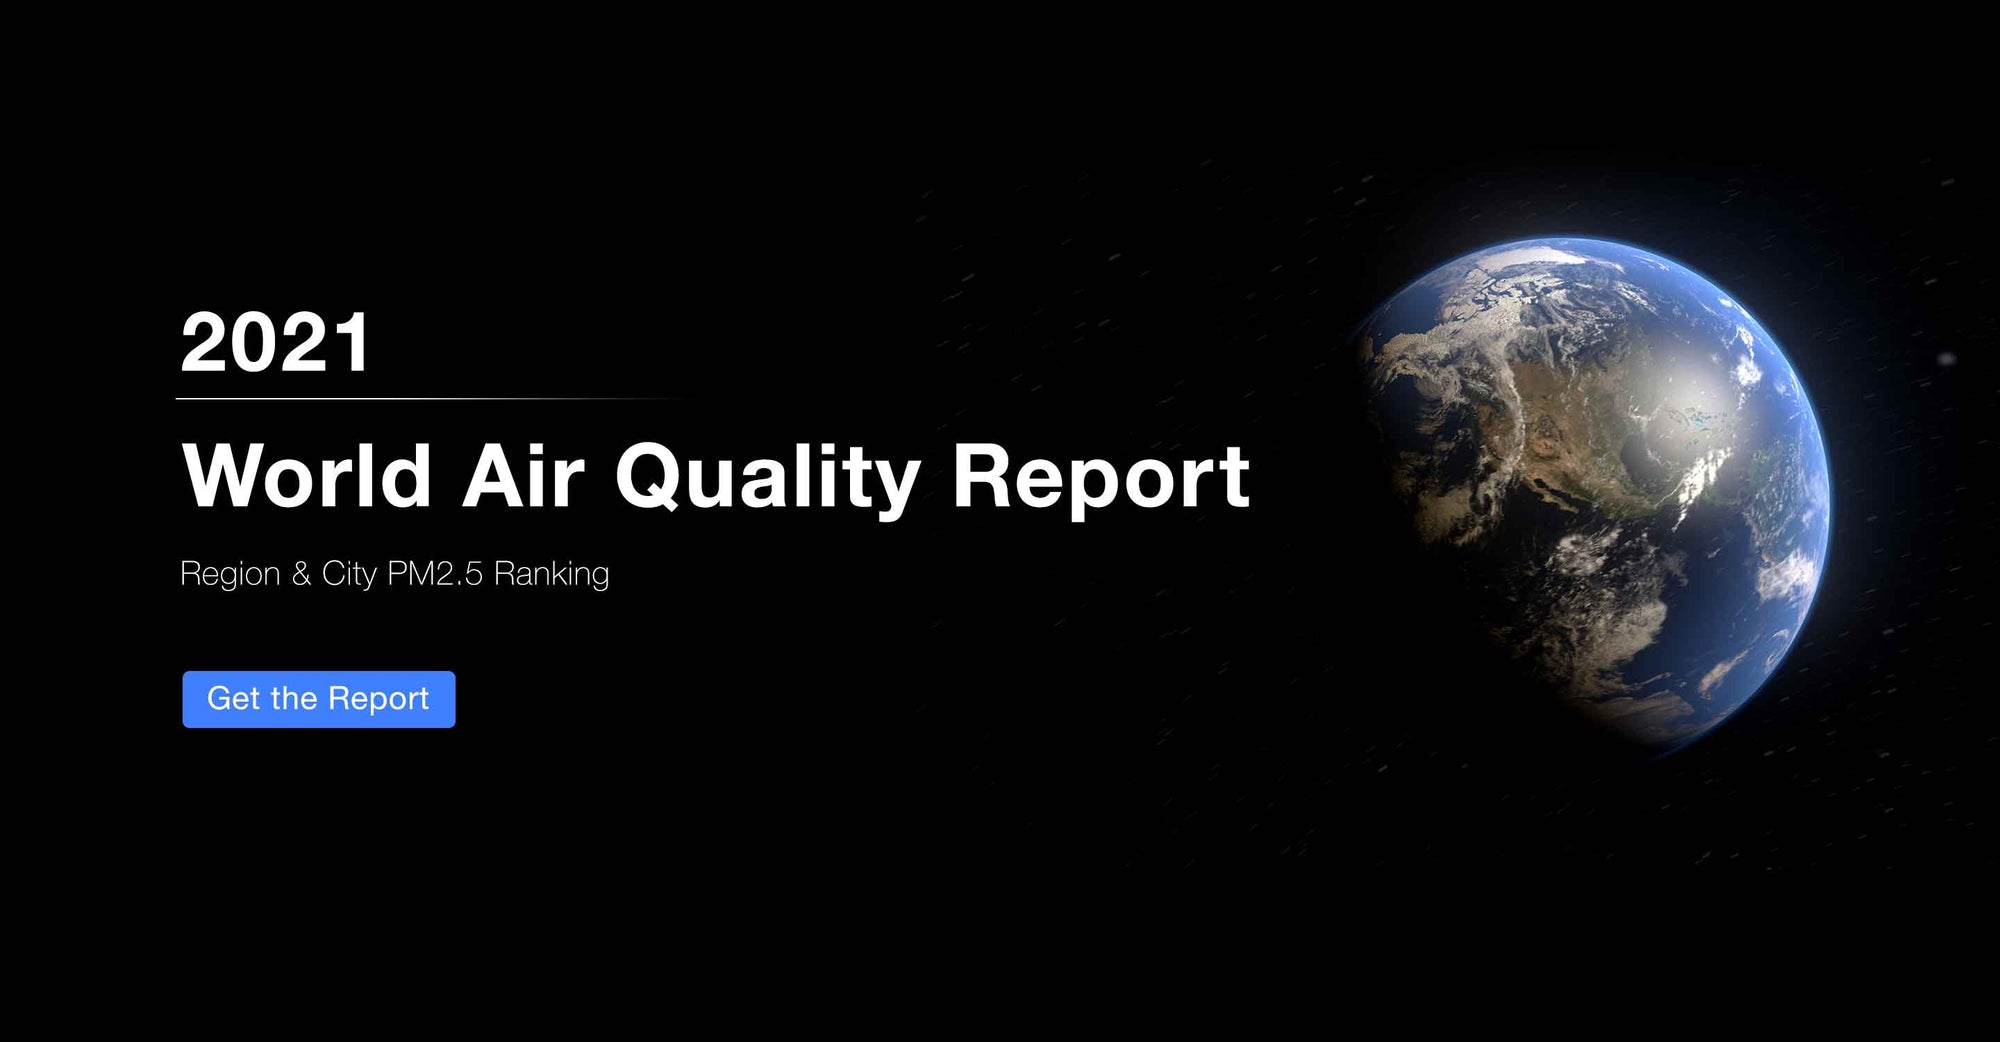 World Air Quality Report 2021